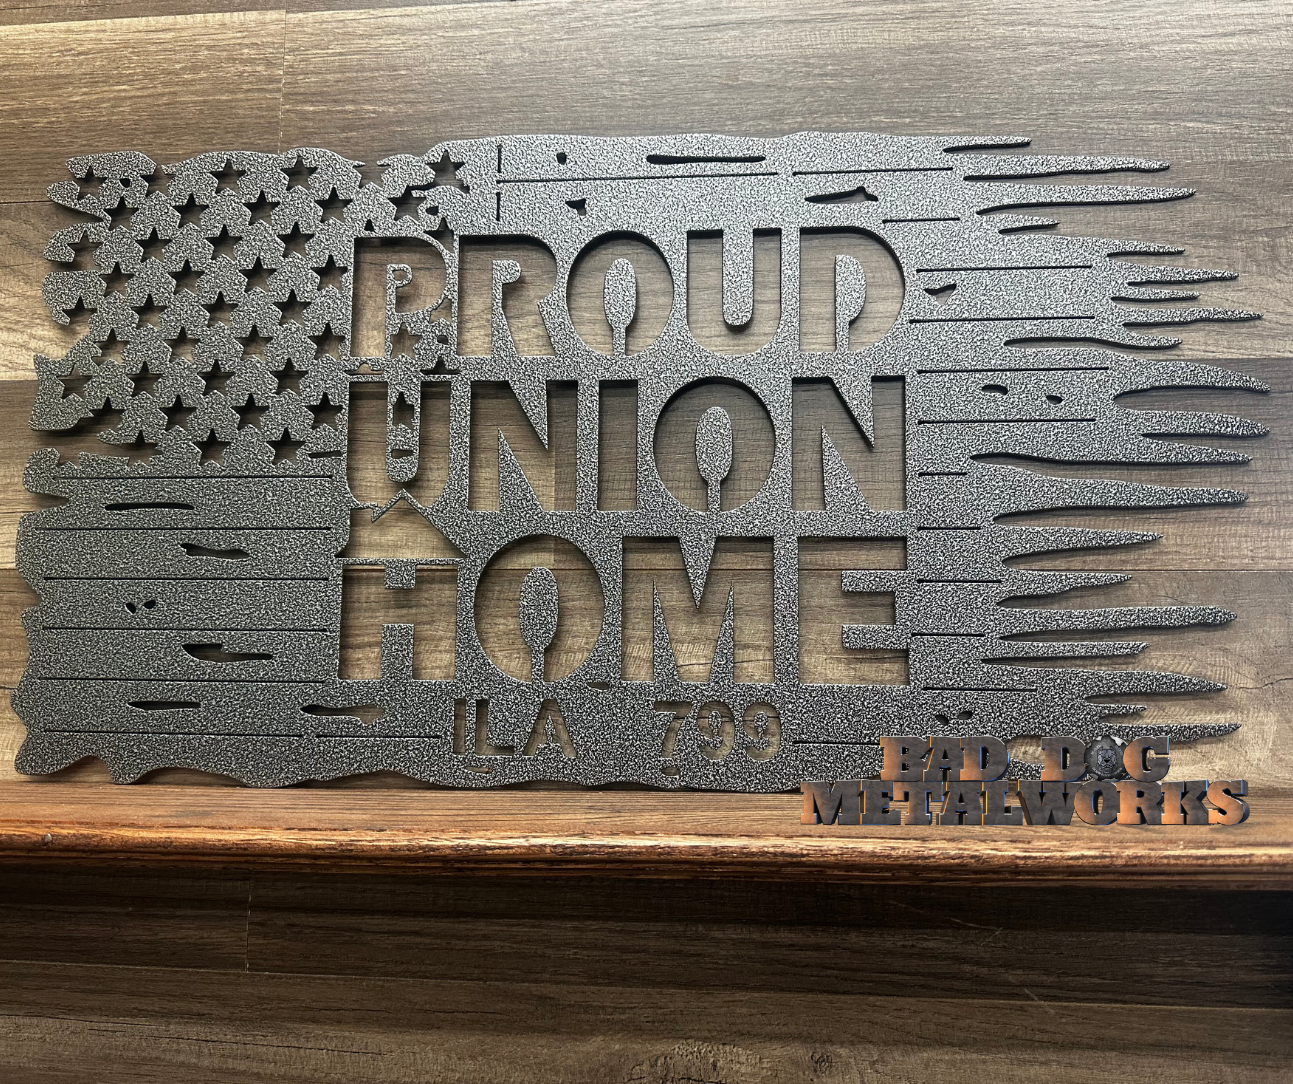 Proud Union Home Tattered Flag